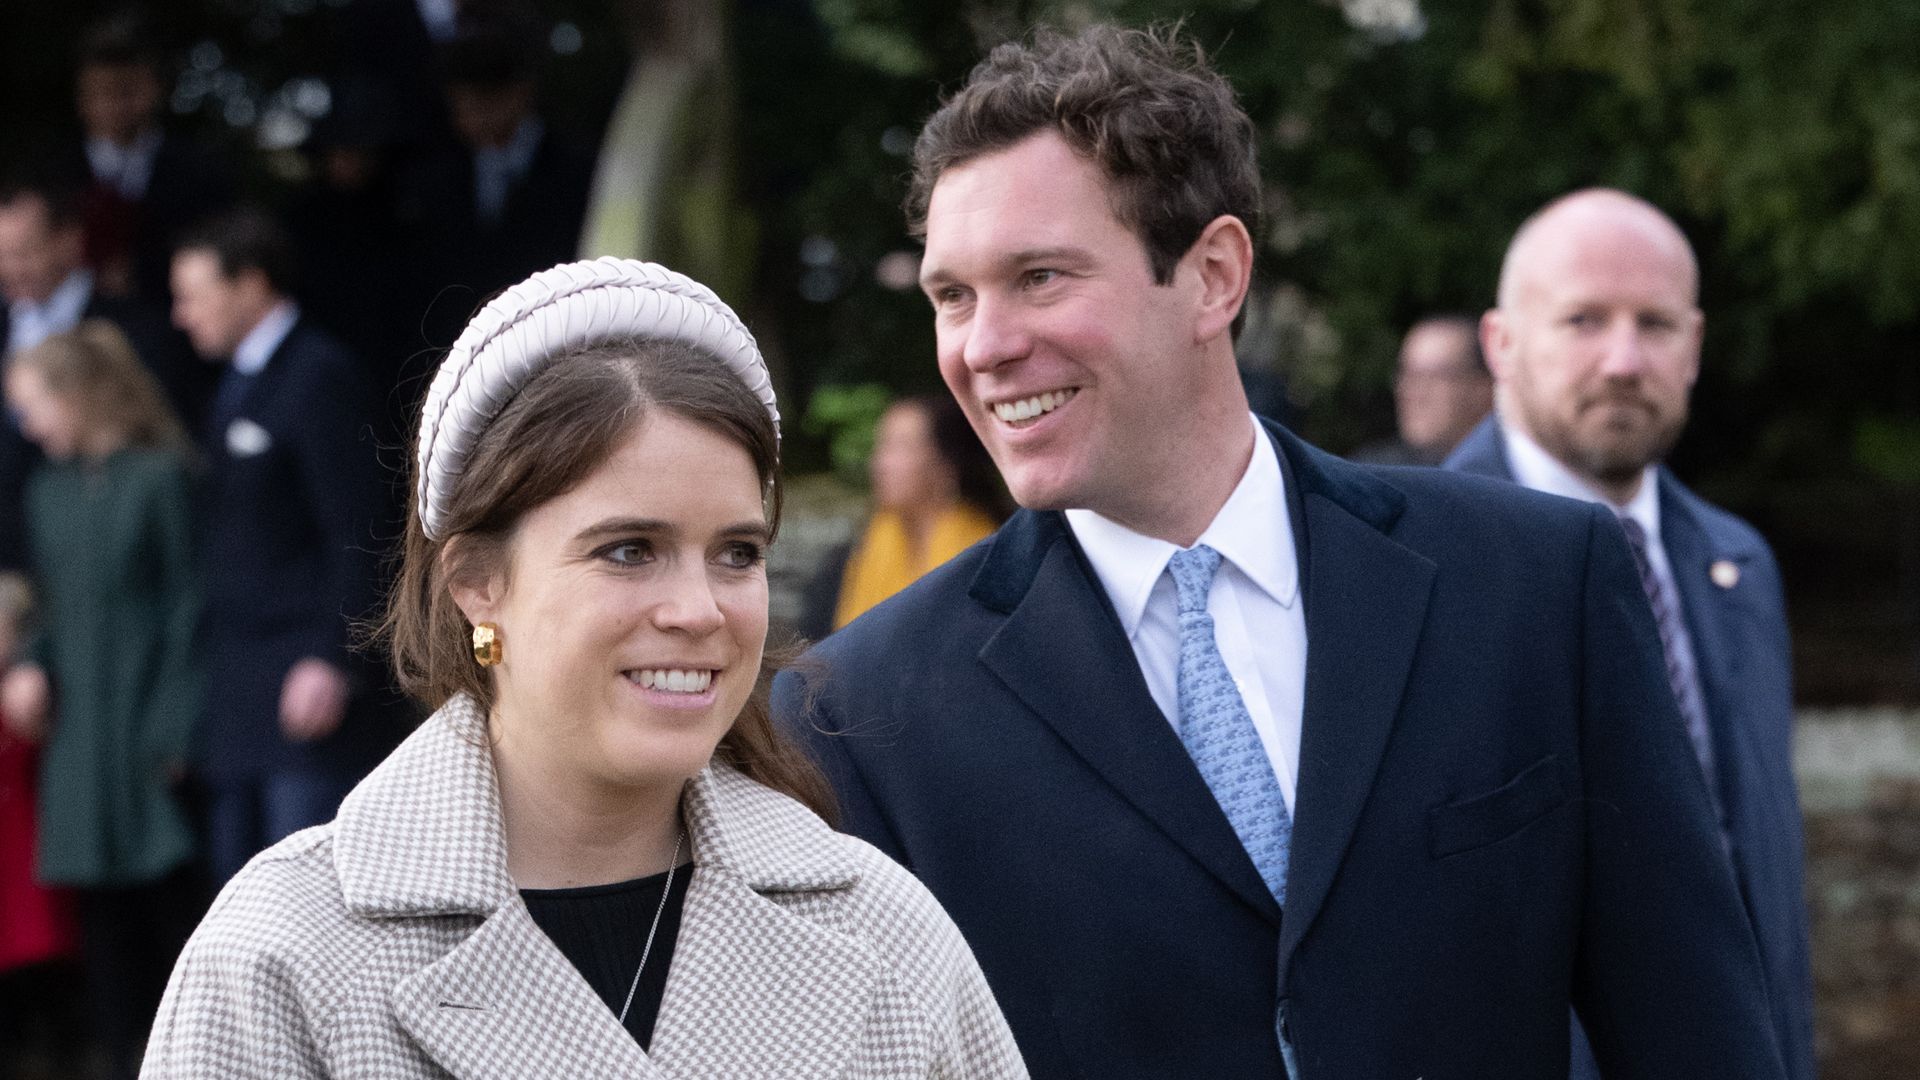 BREAKING: Princess Eugenie welcomes second child with Jack Brooksbank